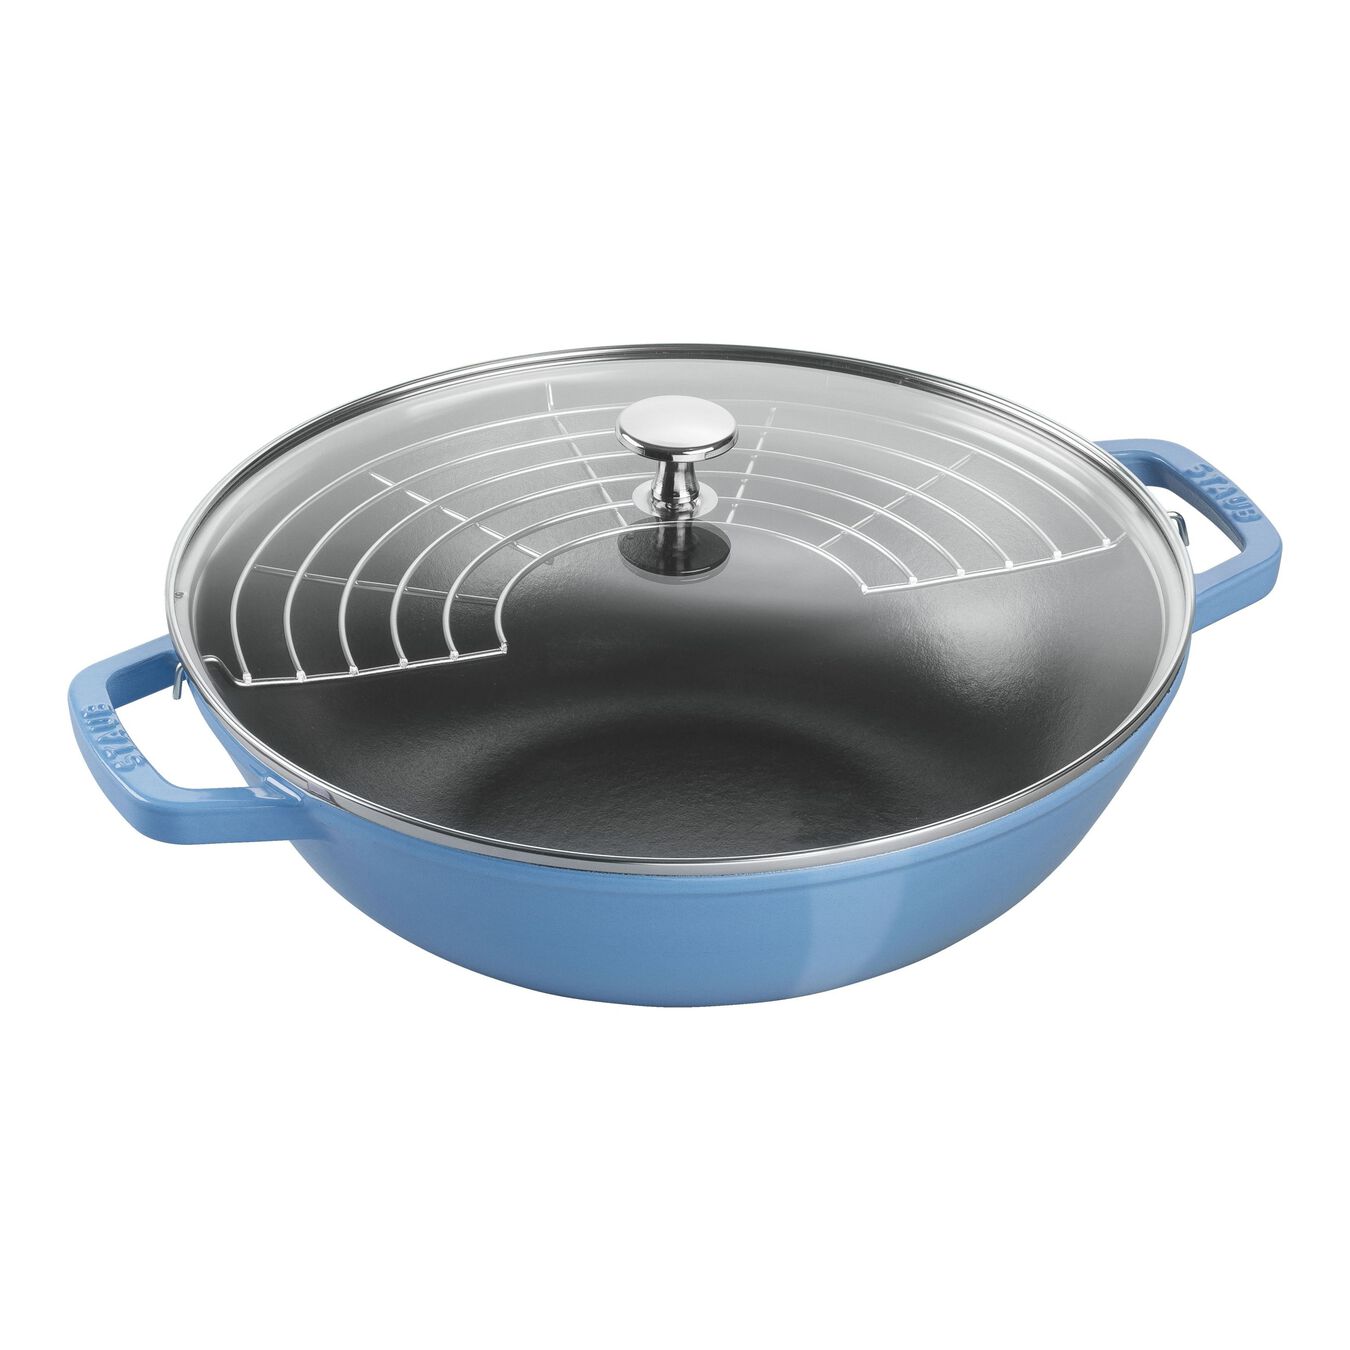 Staub Specialities 30 cm / 12 inch Wok, ice-blue | Official ZWILLING Shop